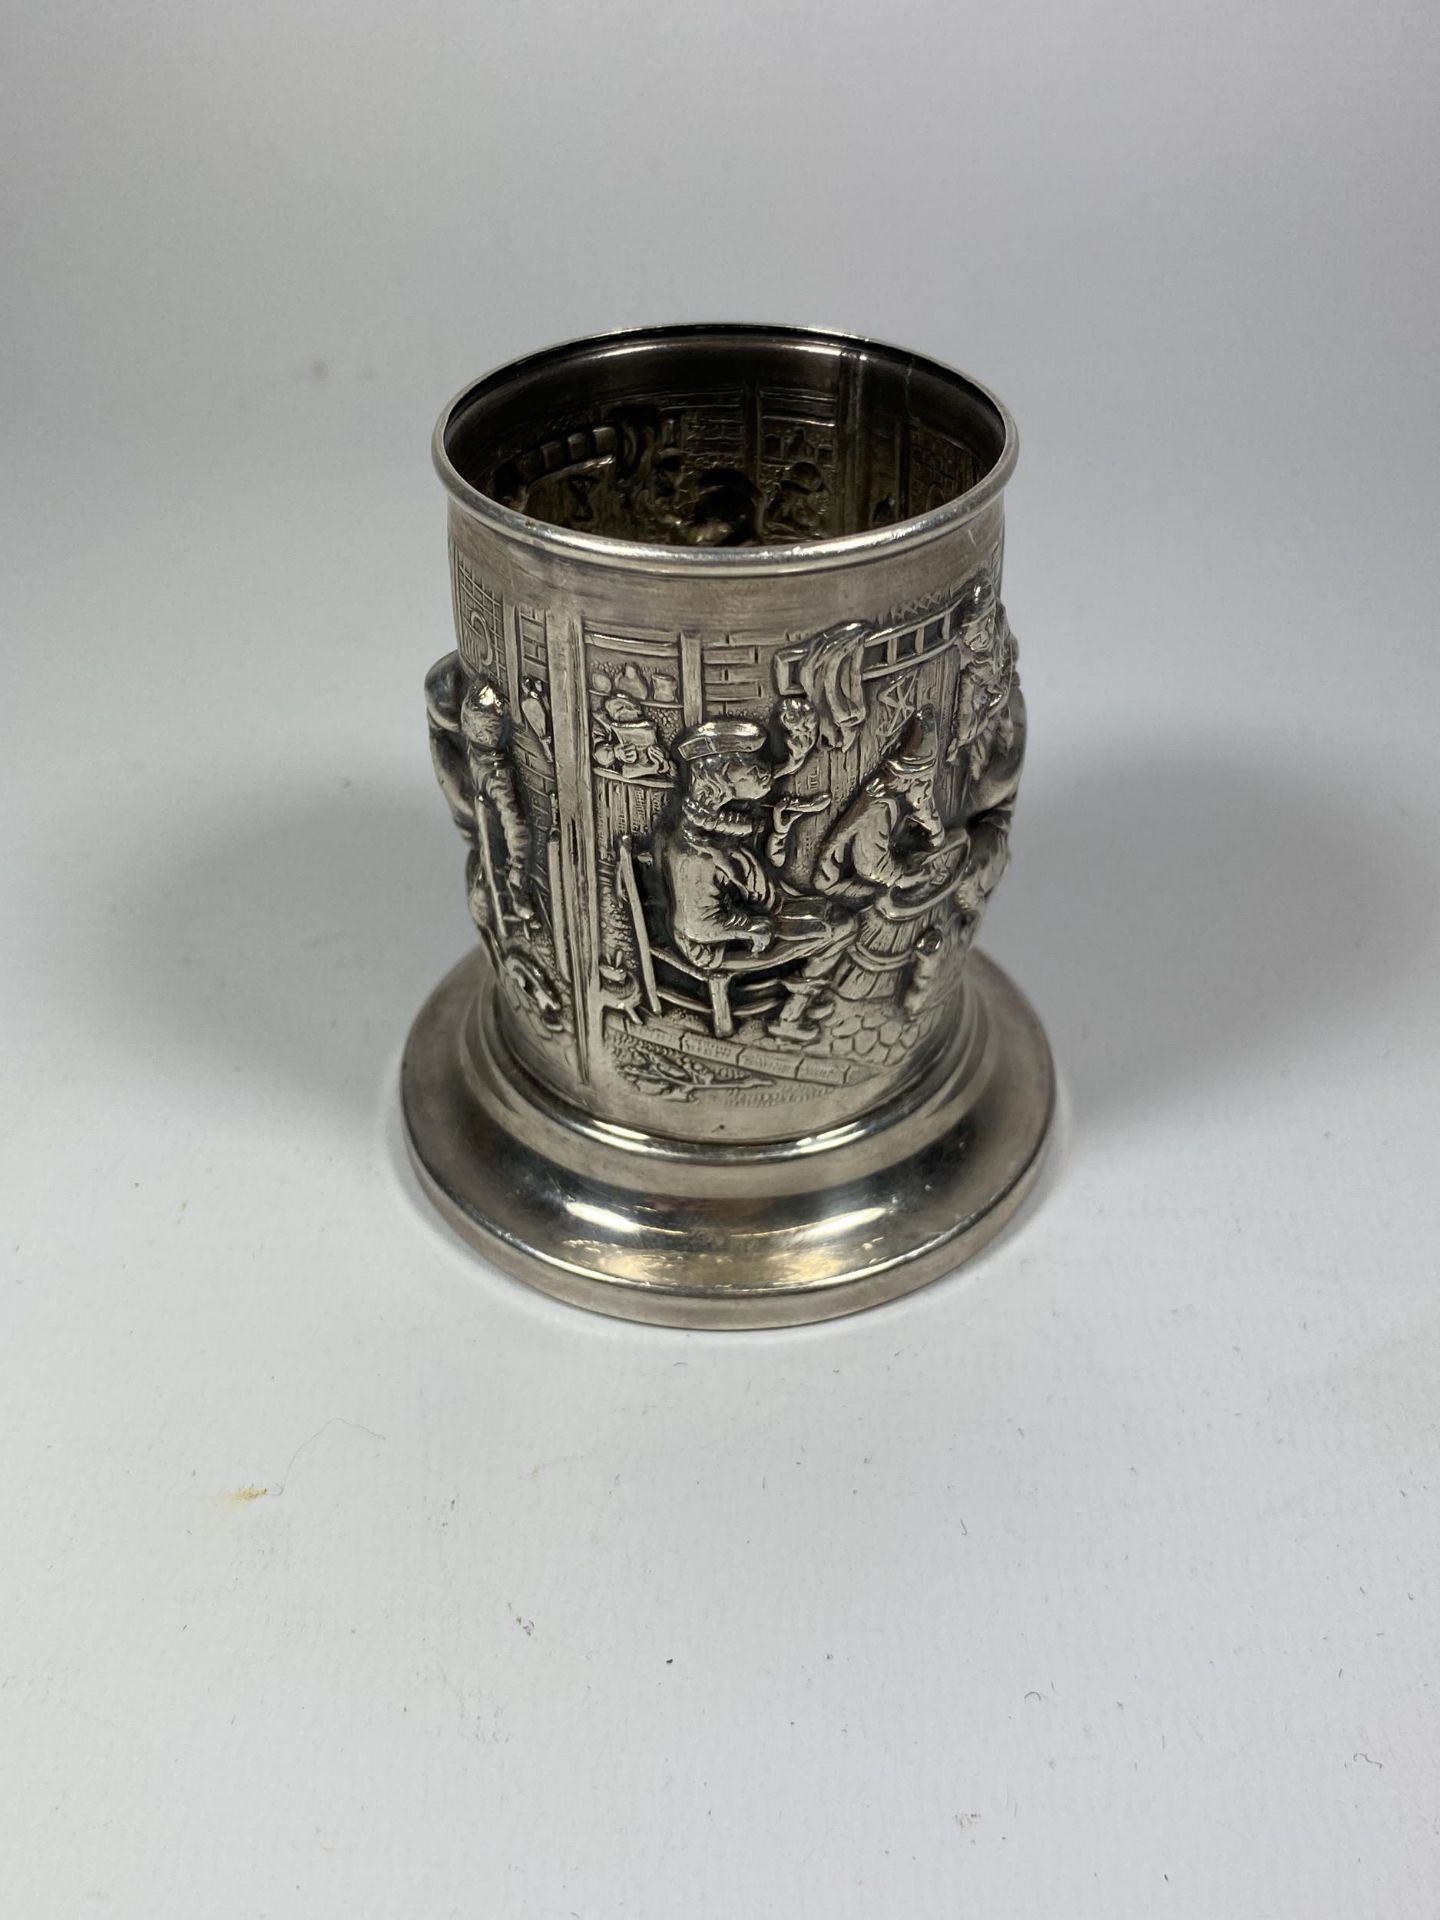 A TESTED SILVER, POSSIBLY DUTCH, BEAKER ON STAND WITH A DESIGN OF A COOPERSMITH, WEIGHT 78G - Image 2 of 3